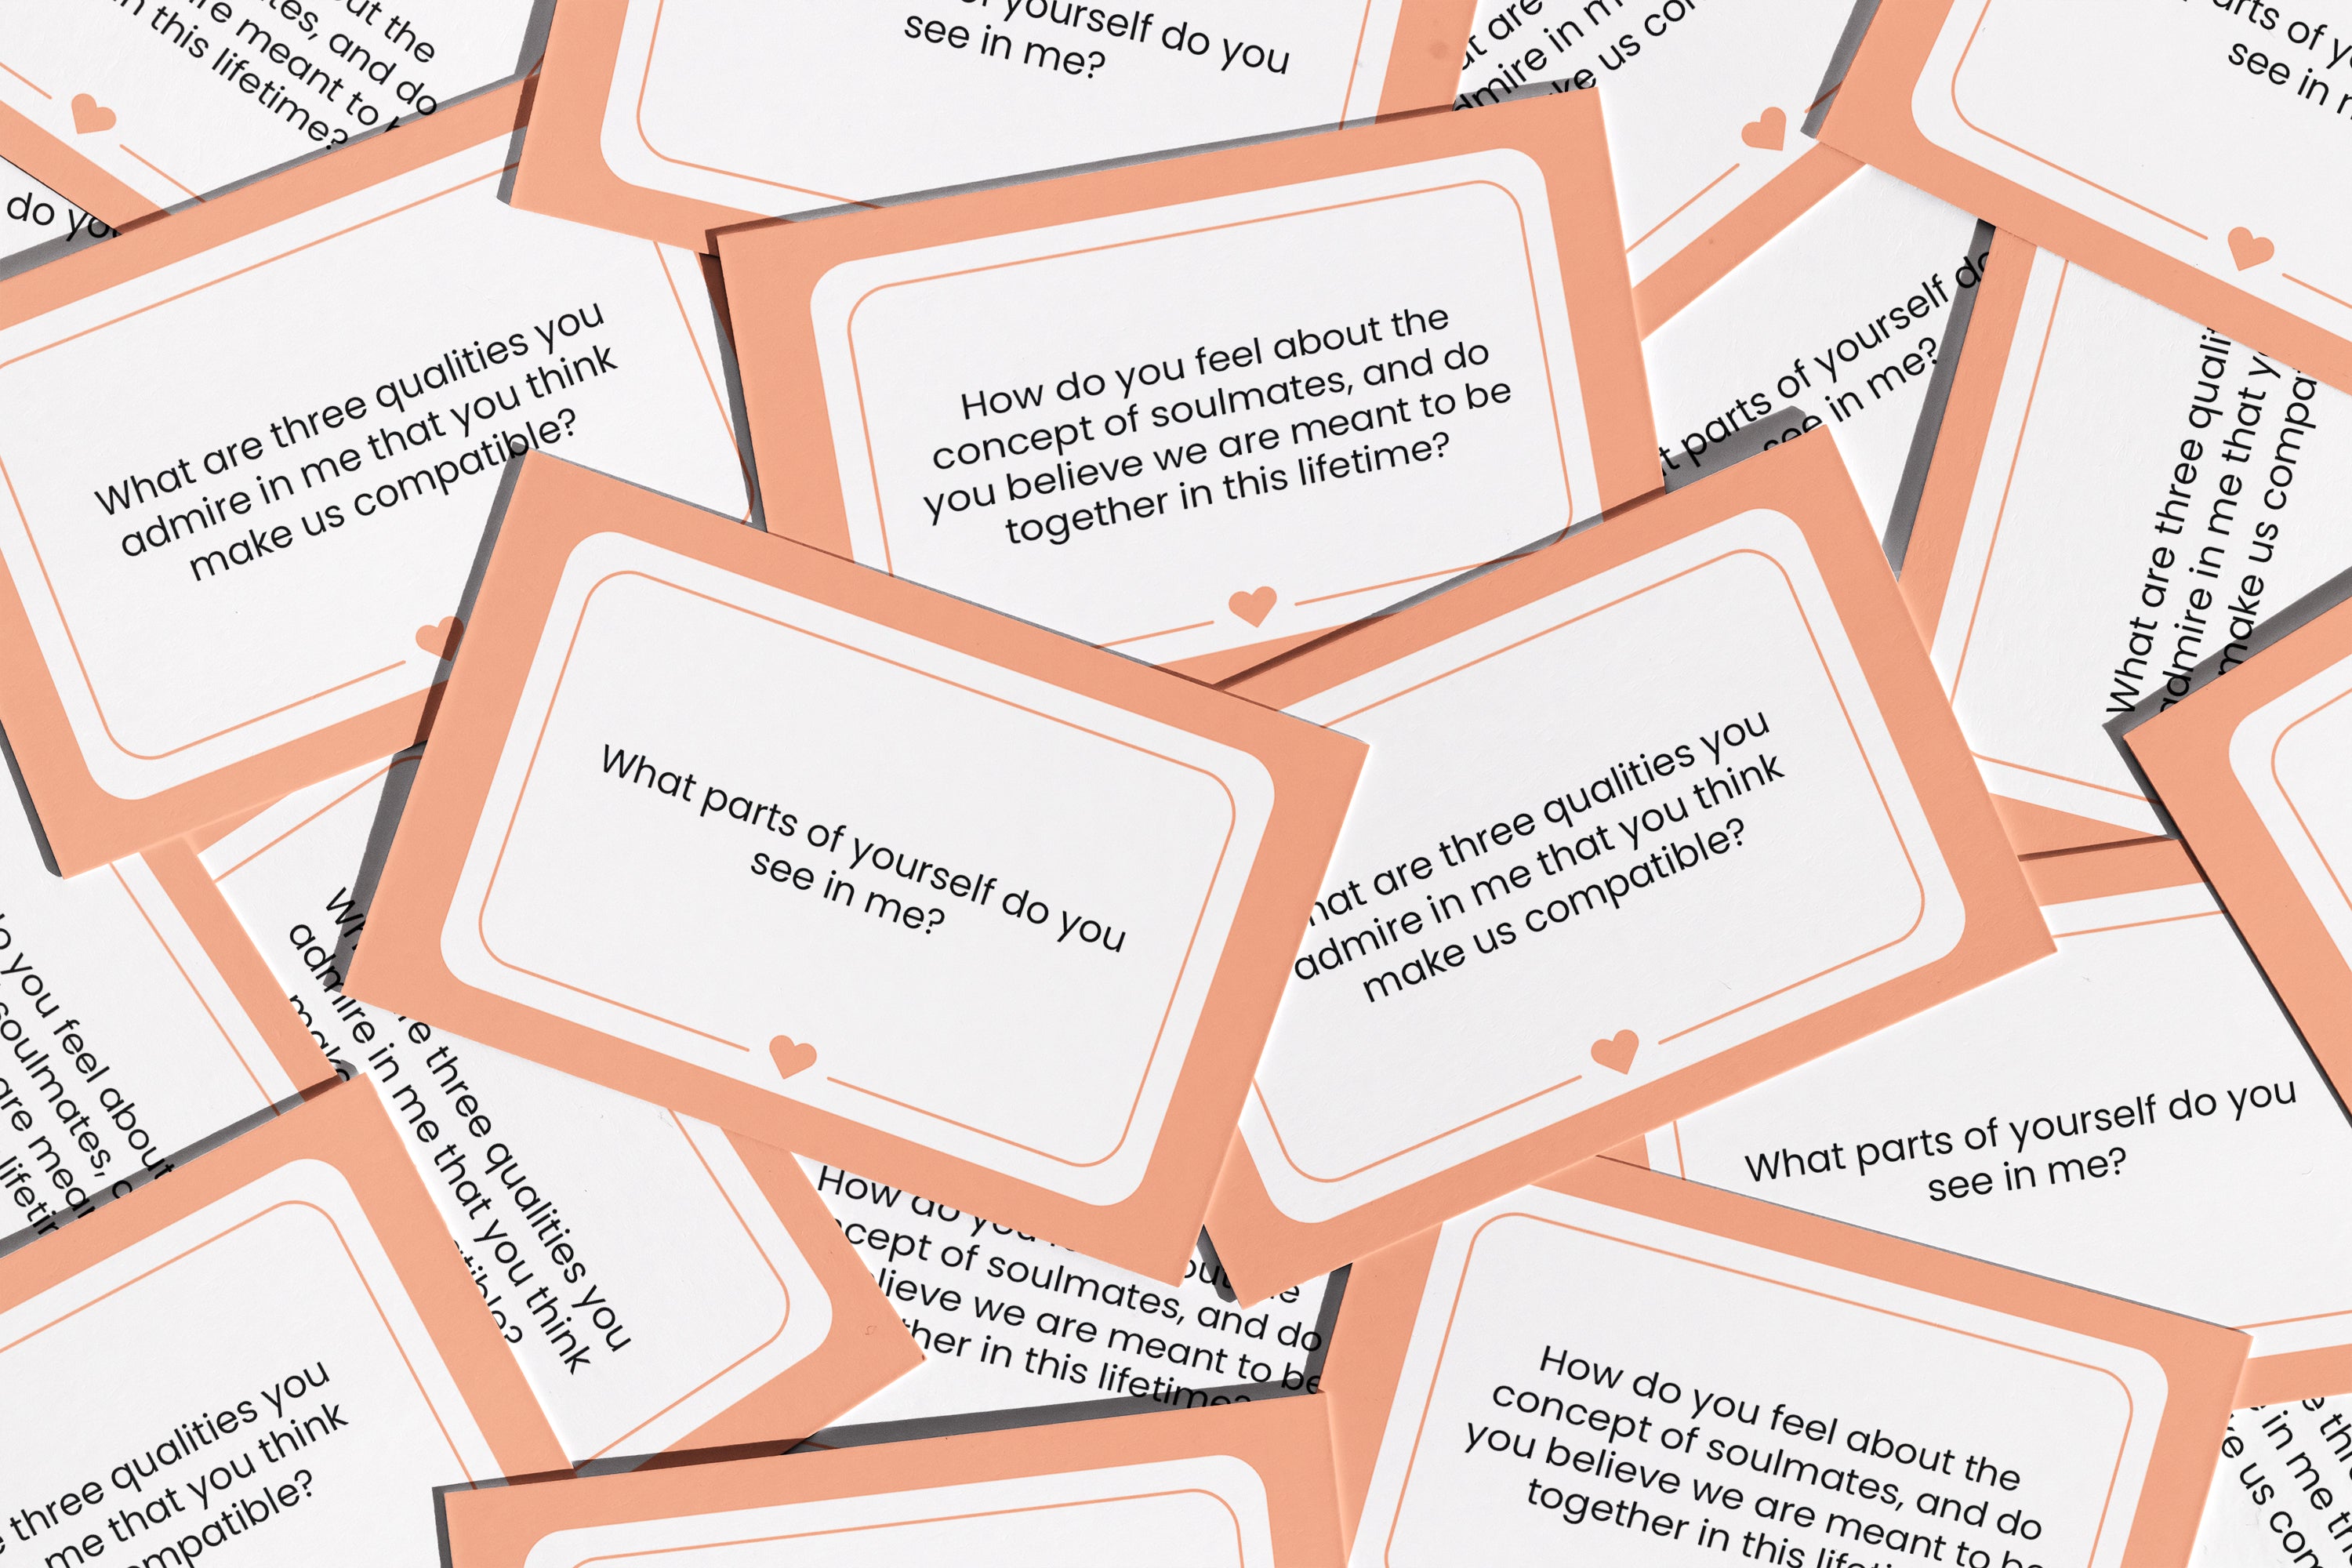 150 thoughtful questions to ask your partner, relationship connection cards, printable couples conversation starter cards, digital download for deep relationship talks, intimacy card games for couples, conversation starter cards, love and relationship question cards, thoughtful conversation starters